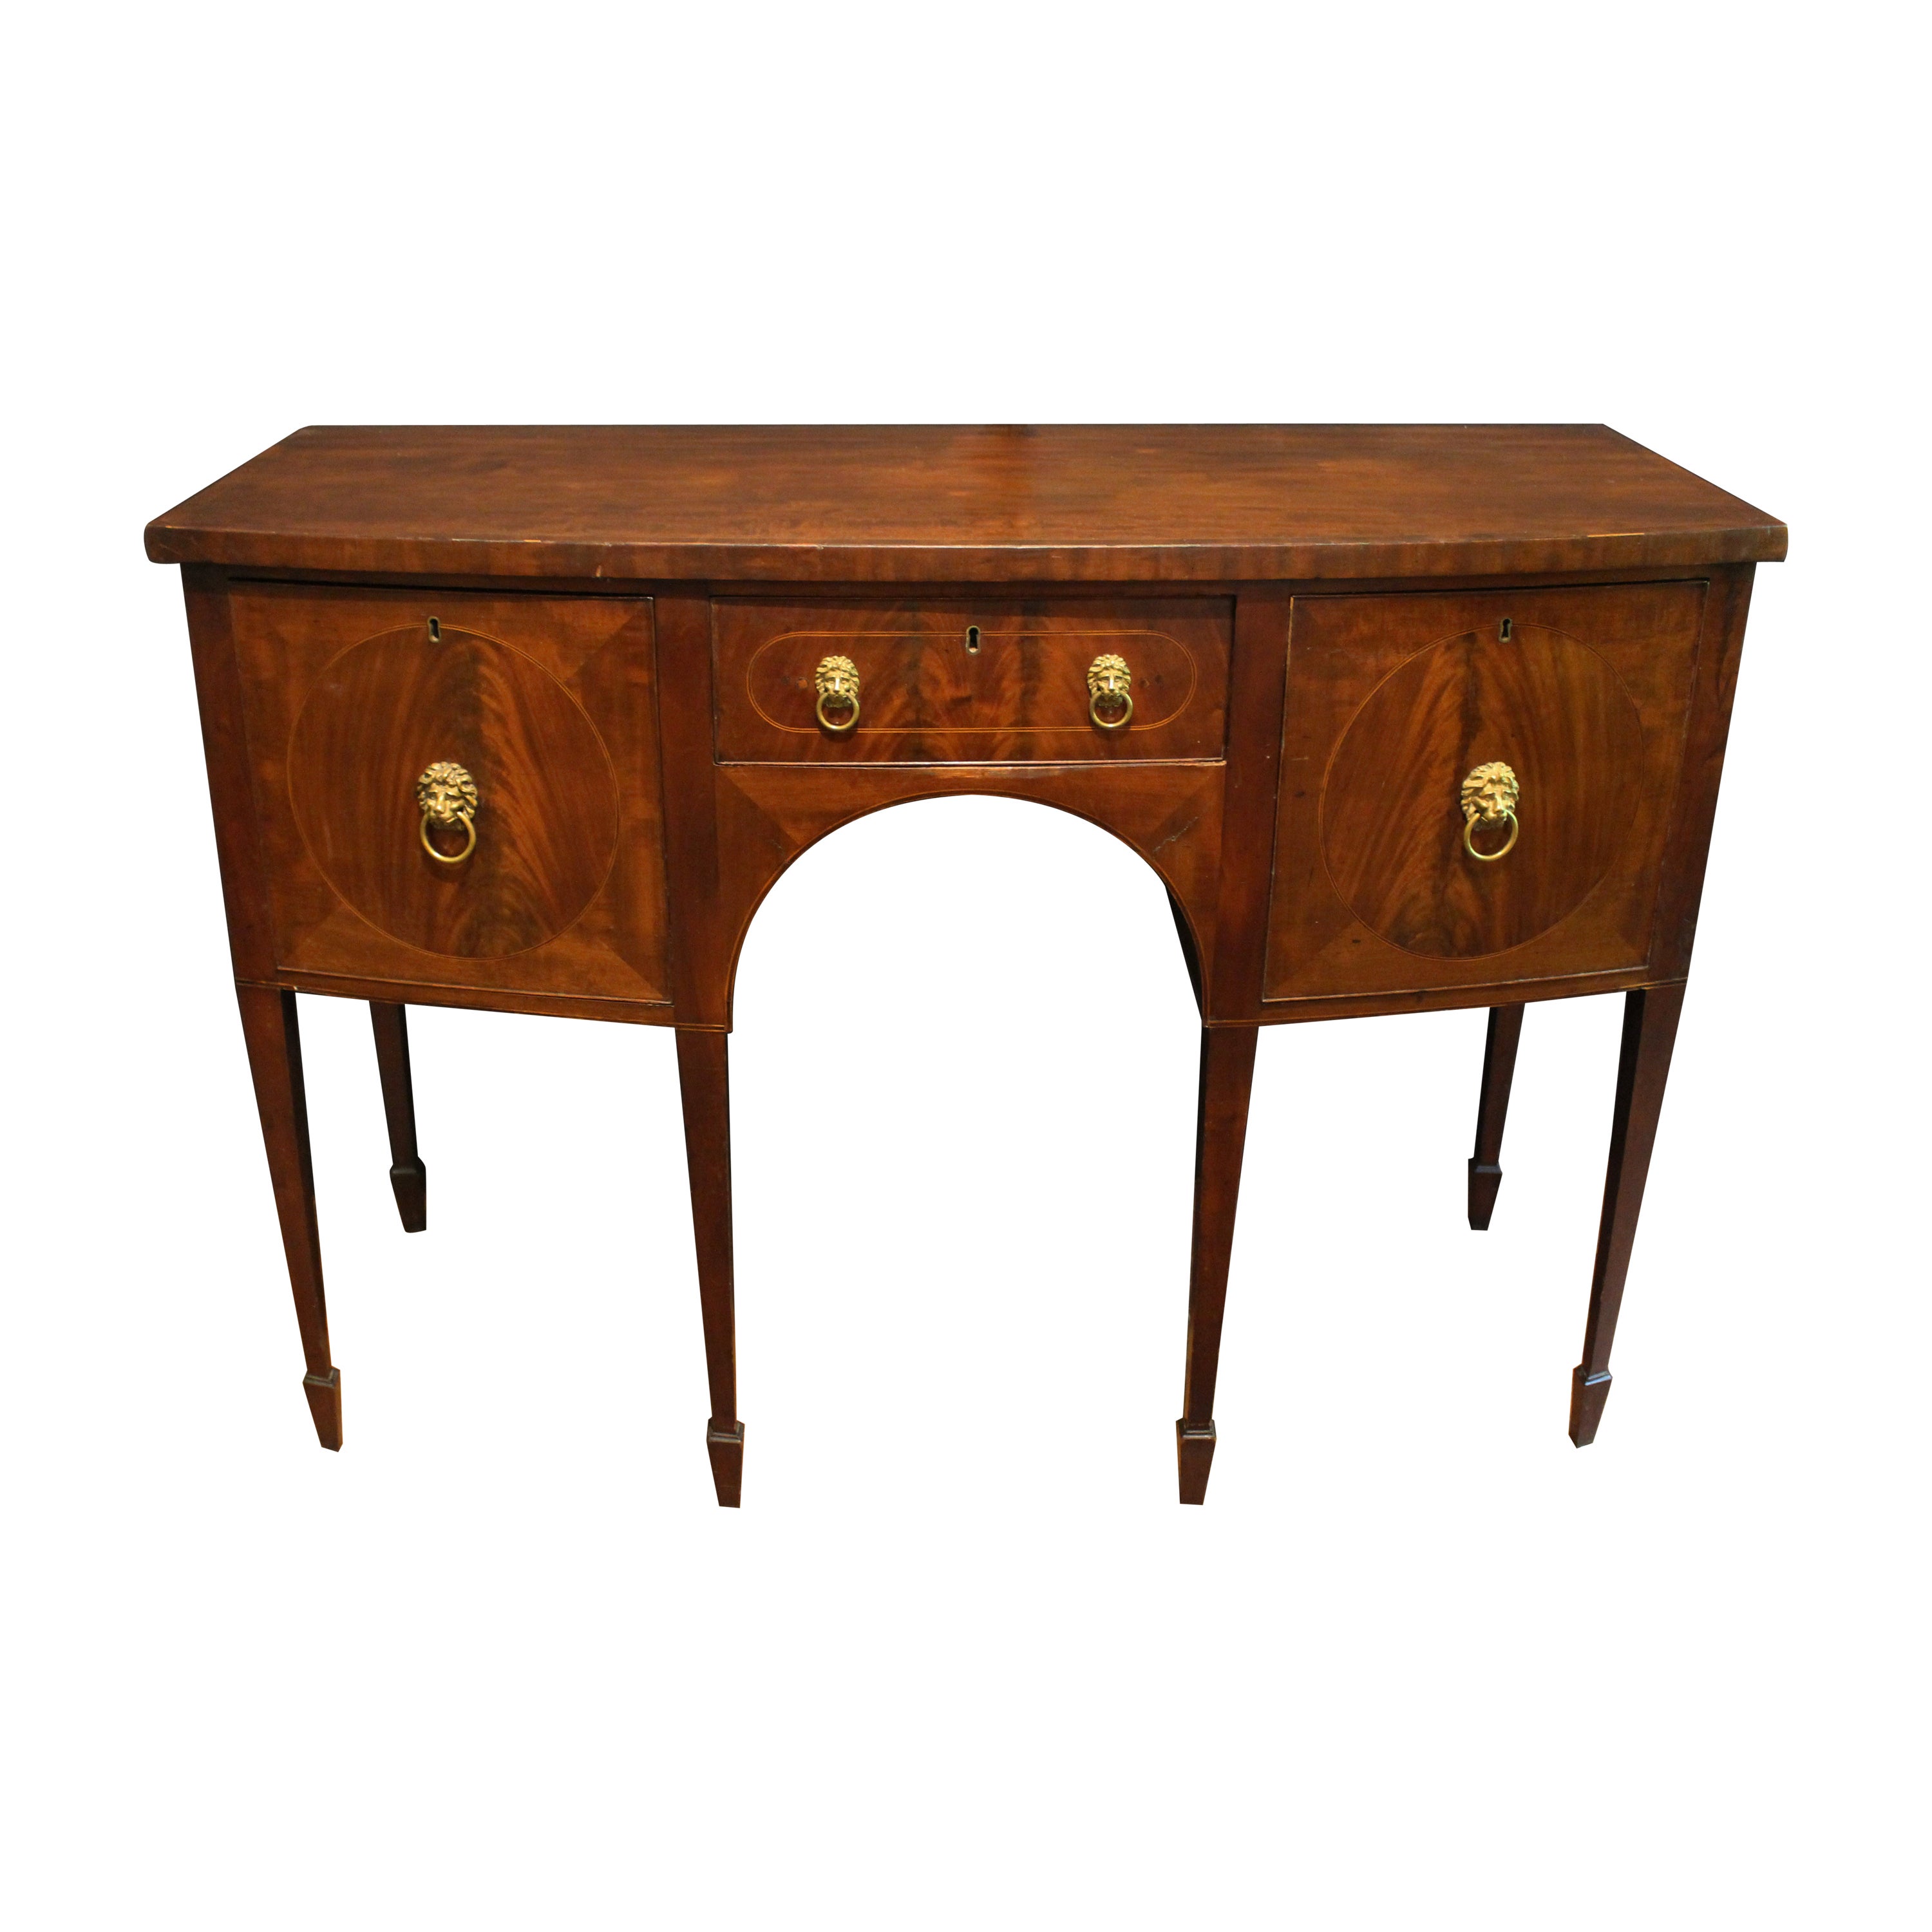 Circa 1770-90 George III Small Bowfront Sideboard For Sale